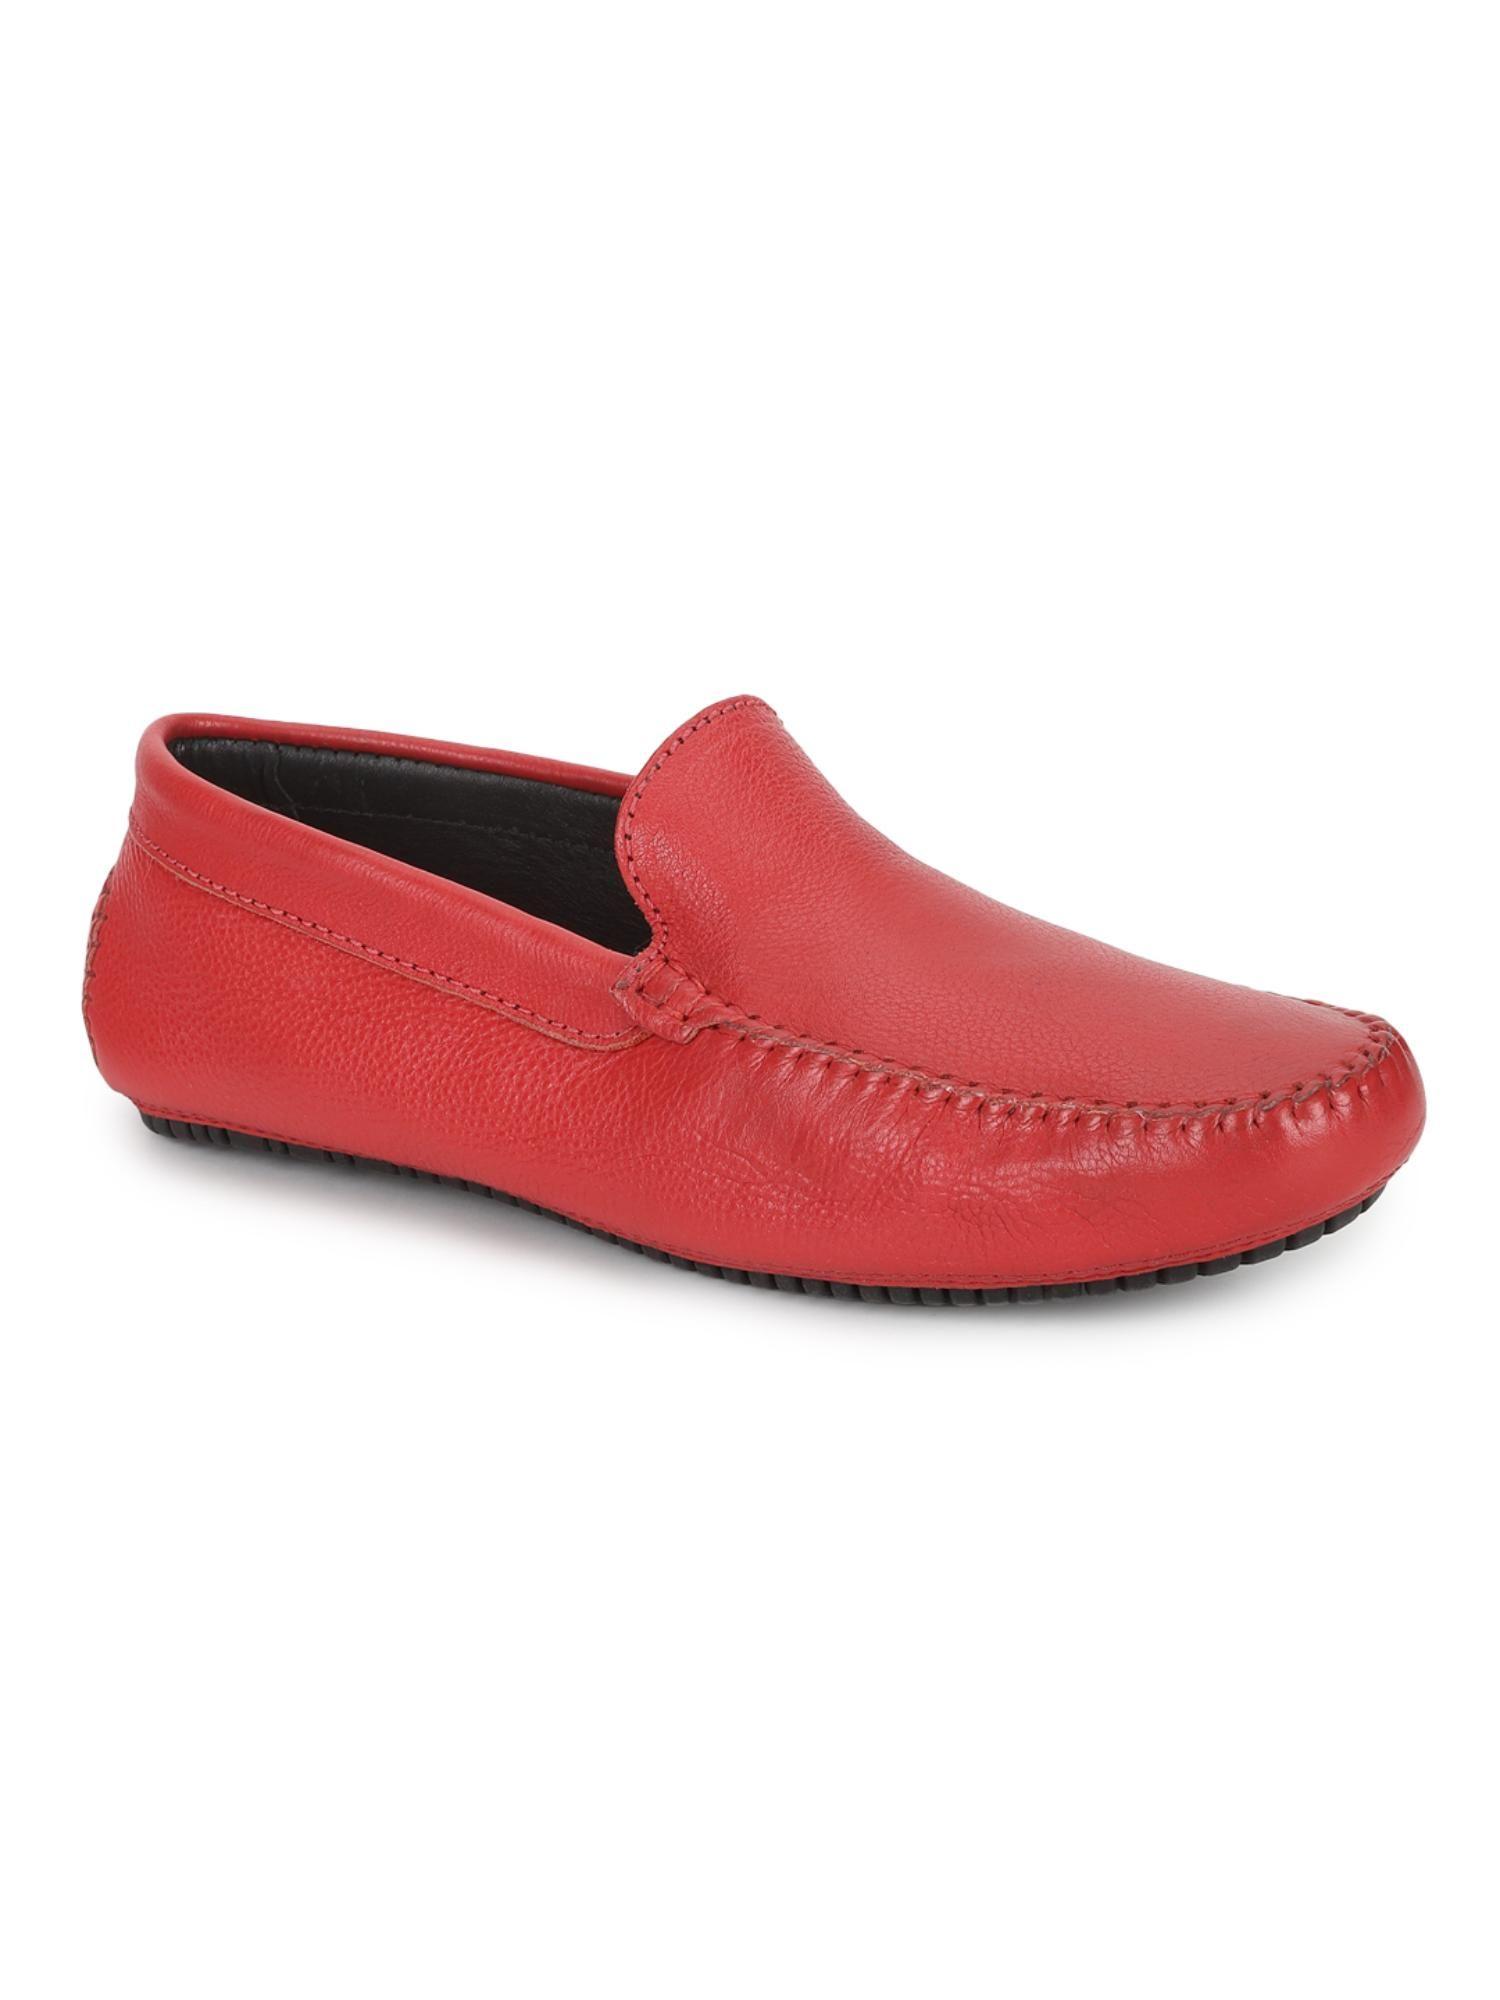 loafer for men arch support premium buttery leather